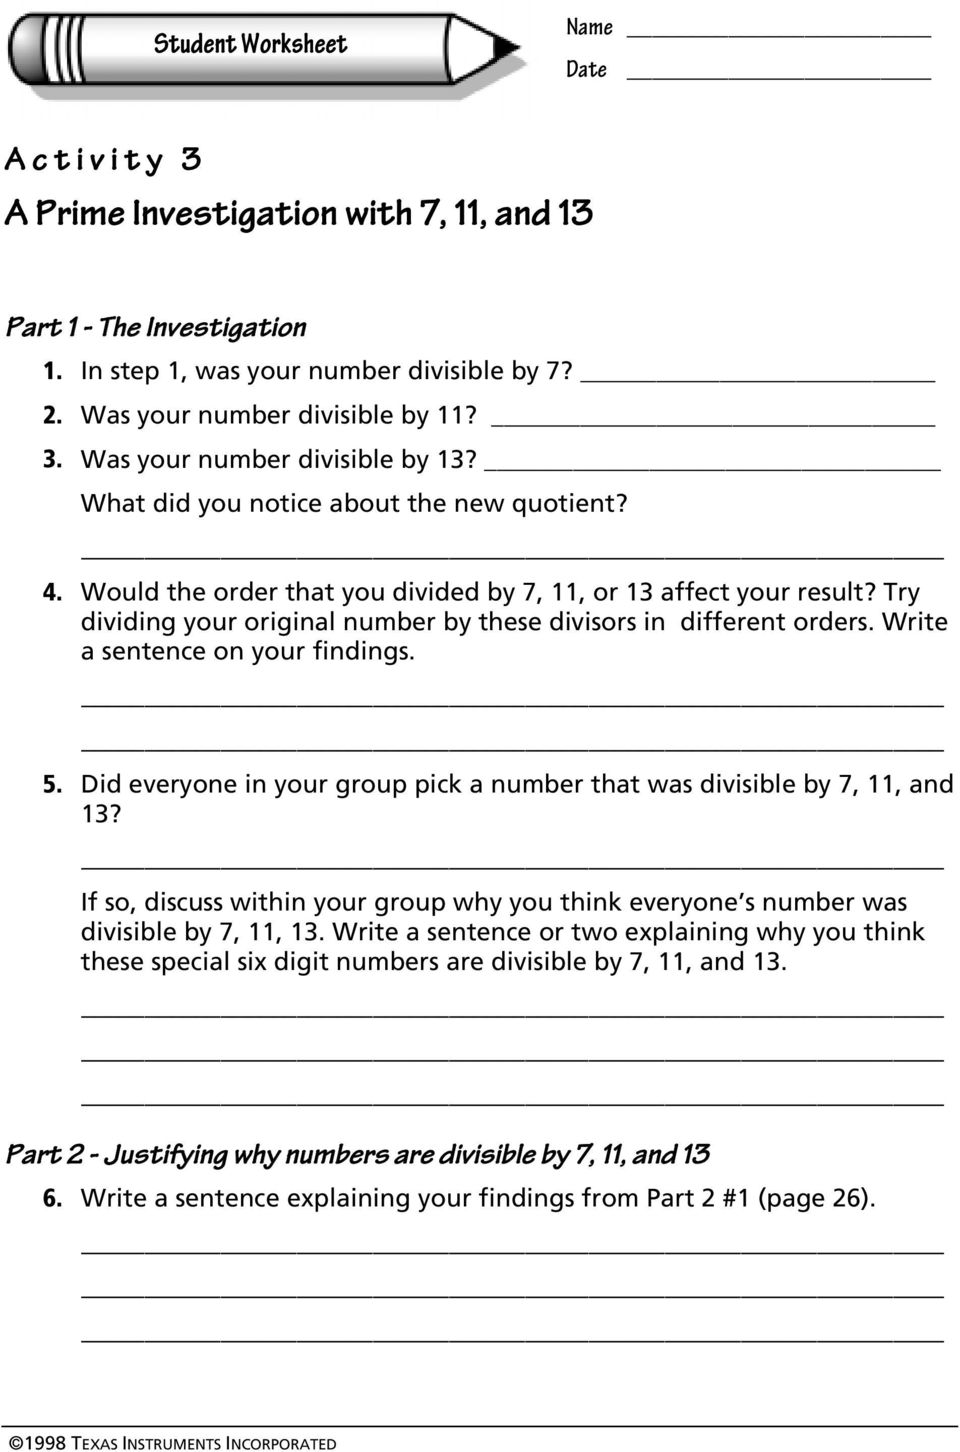 Write a sentence on your findings. 5. Did everyone in your group pick a number that was divisible by 7, 11, and 13?